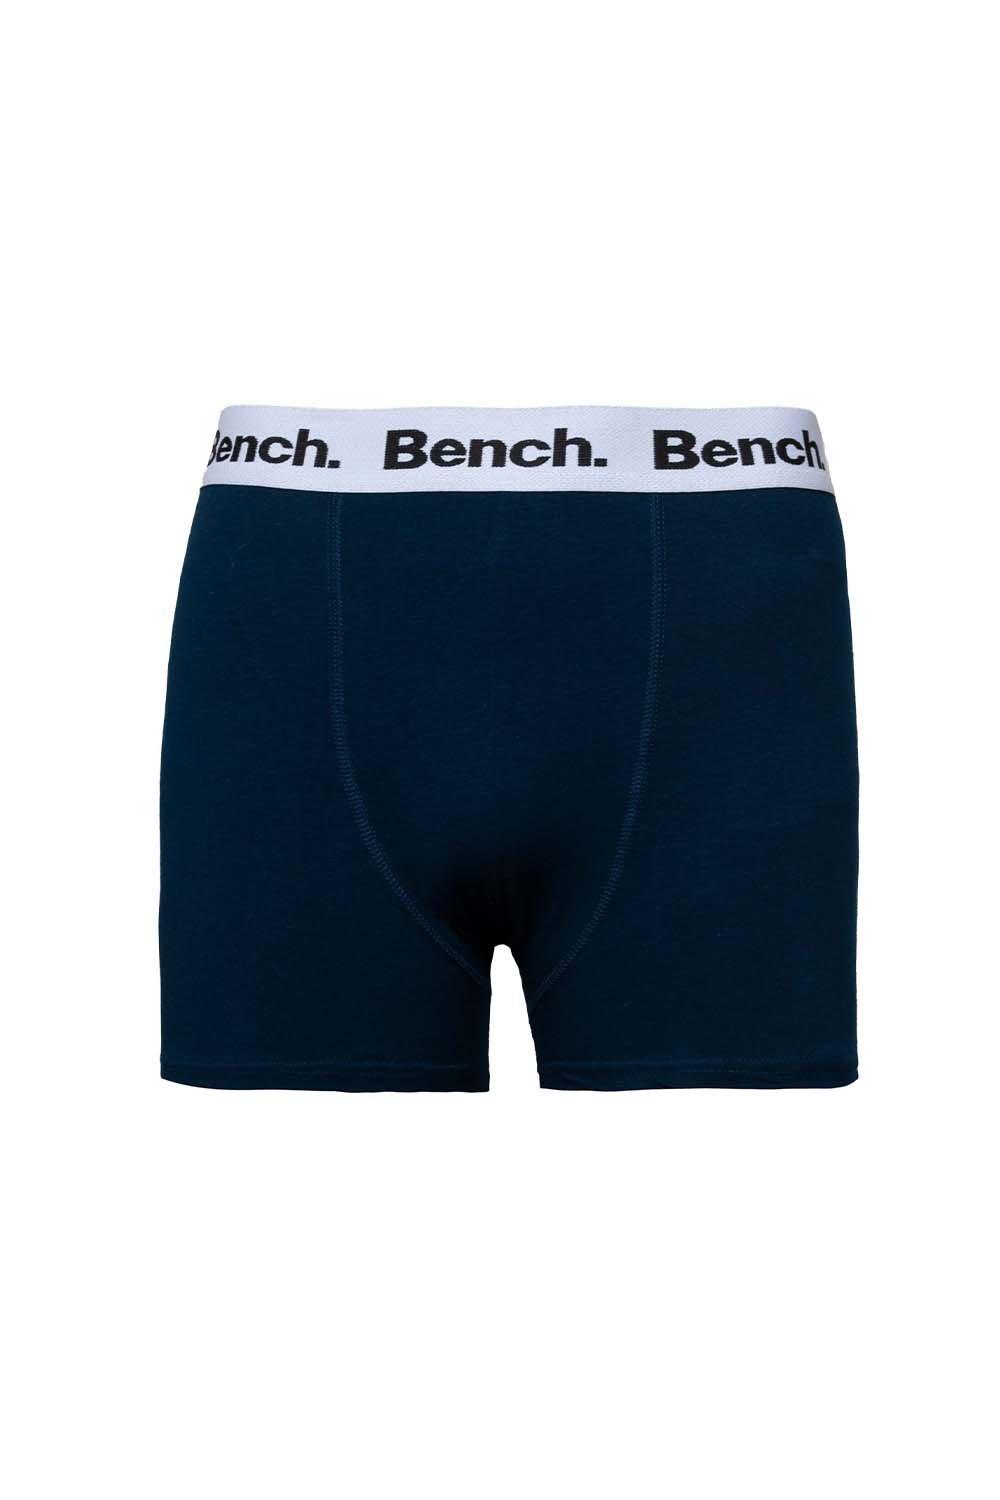 Bench Mens Newham 3 Pack Elasticated Underwear Boxers Boxer Shorts - Multi